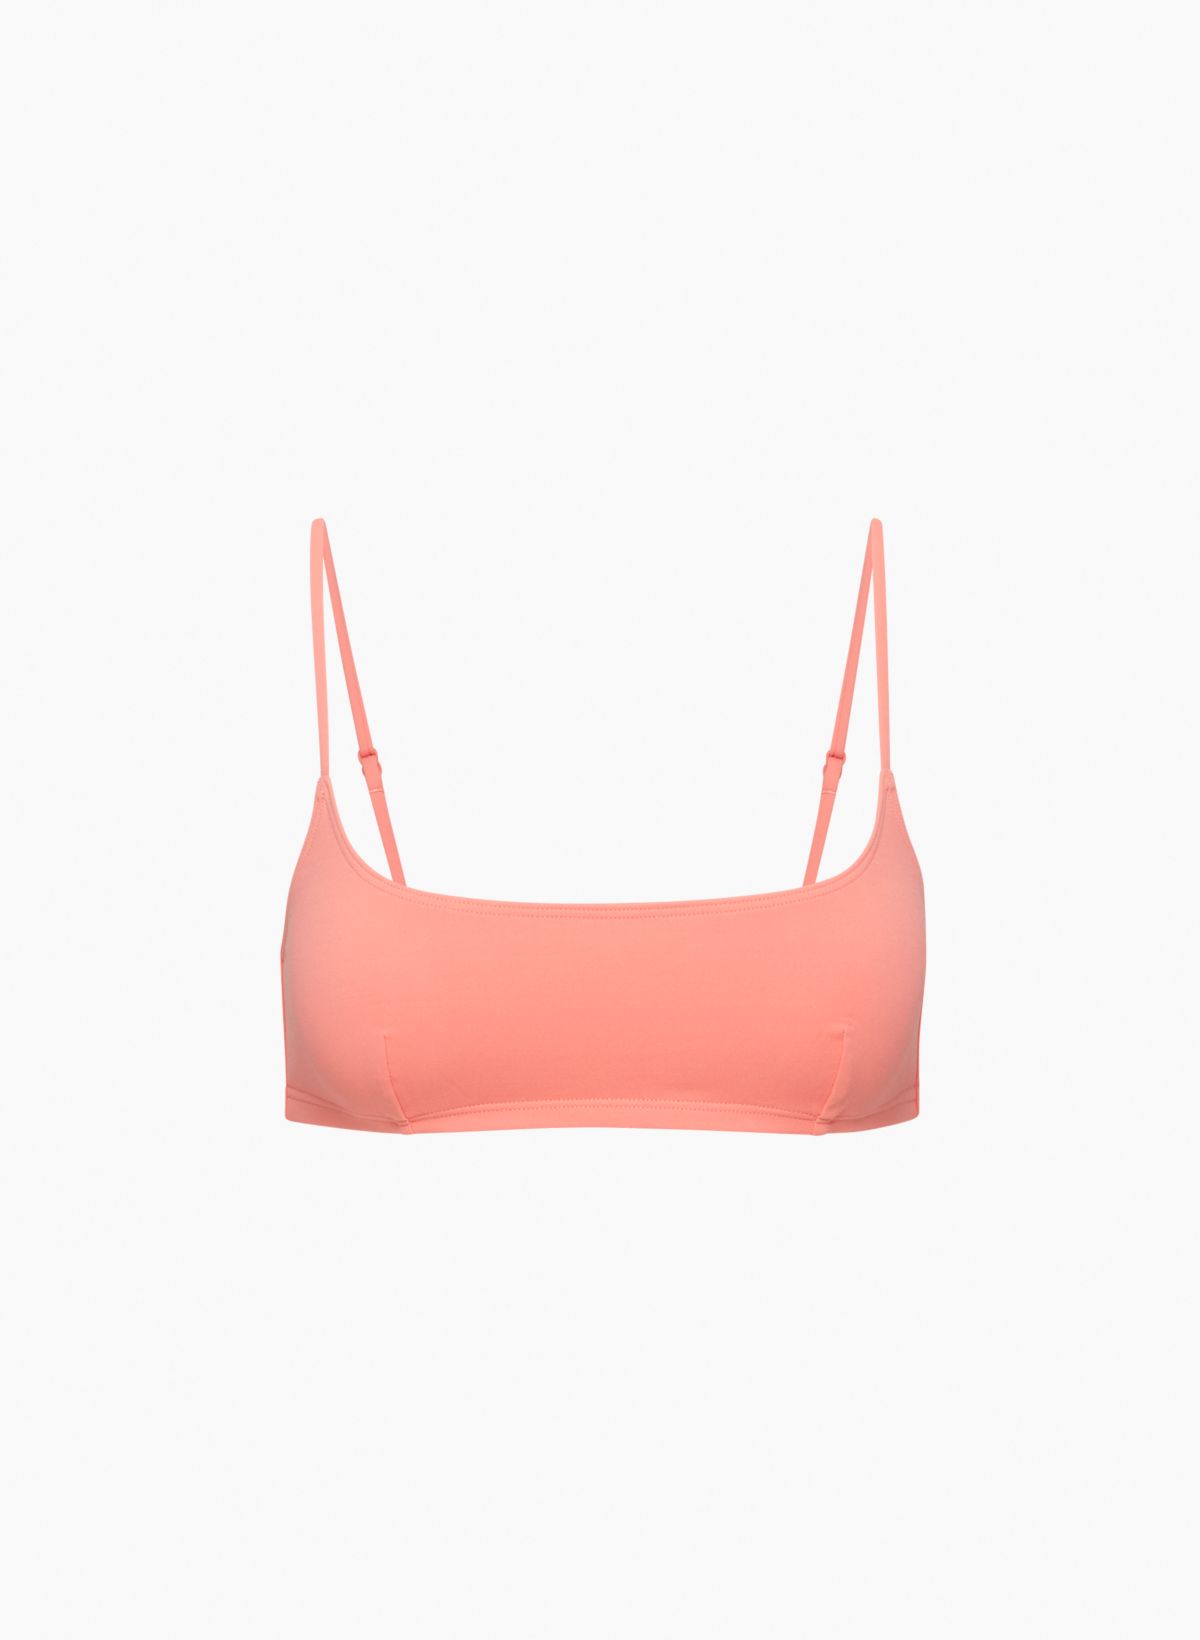 PINK - Victoria's Secret Everyday lined Bra Size undefined - $17